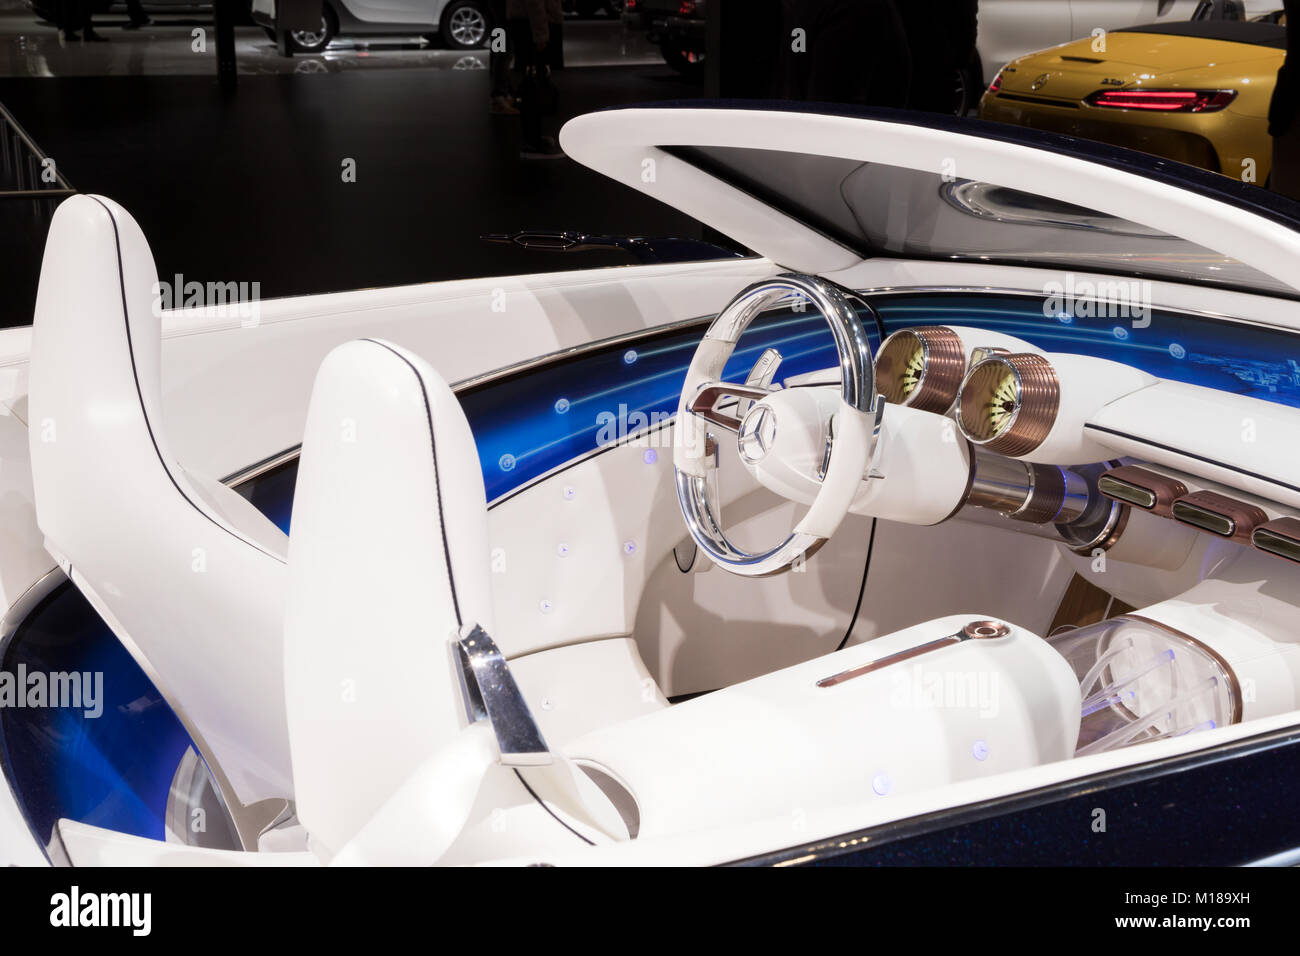 BRUSSELS - JAN 10, 2018: Interior view of a Vision Mercedes